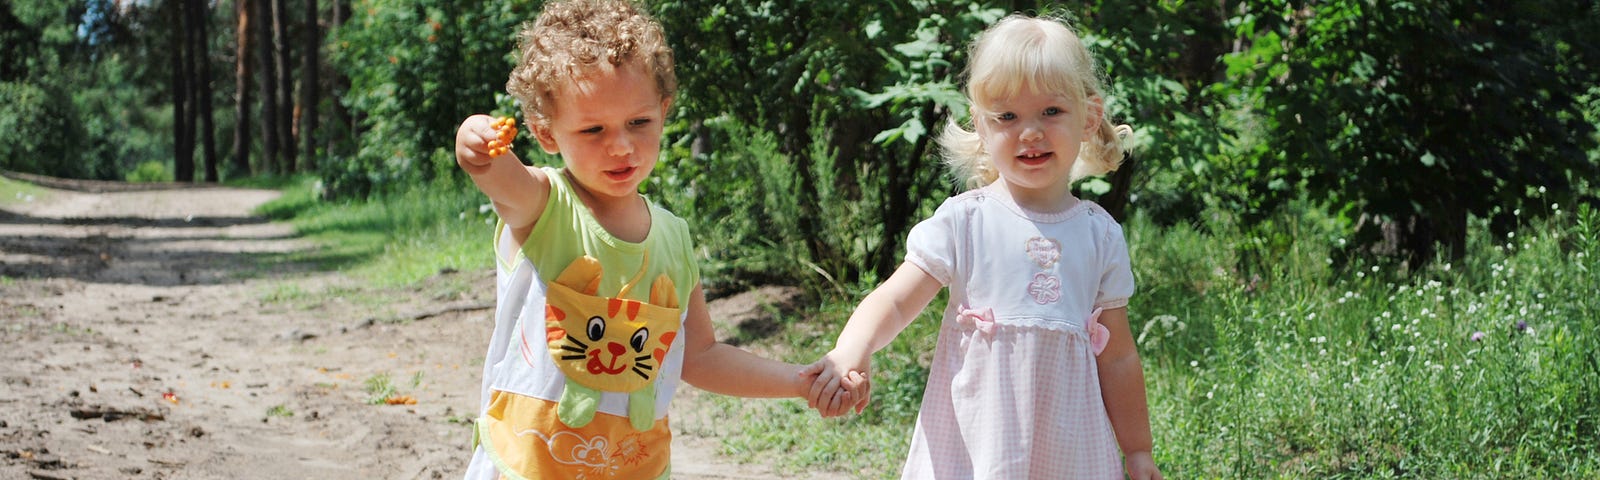 The day I lost two preschoolers in a forest, or how a happy day turned into horror in a flash.